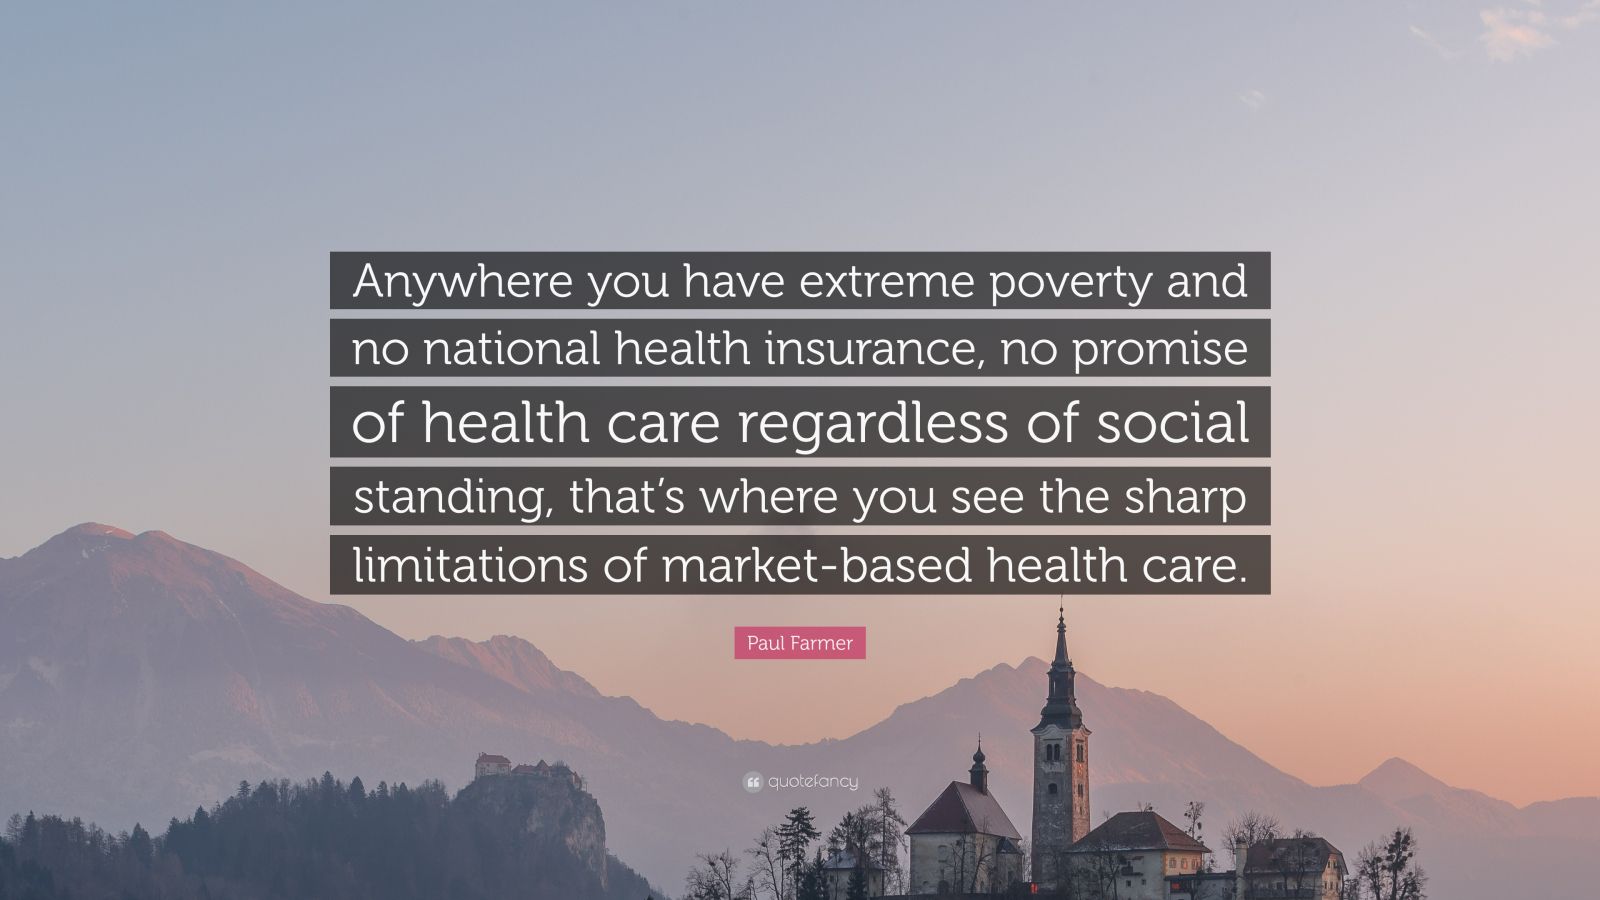 Paul Farmer Quote: “Anywhere you have extreme poverty and no national